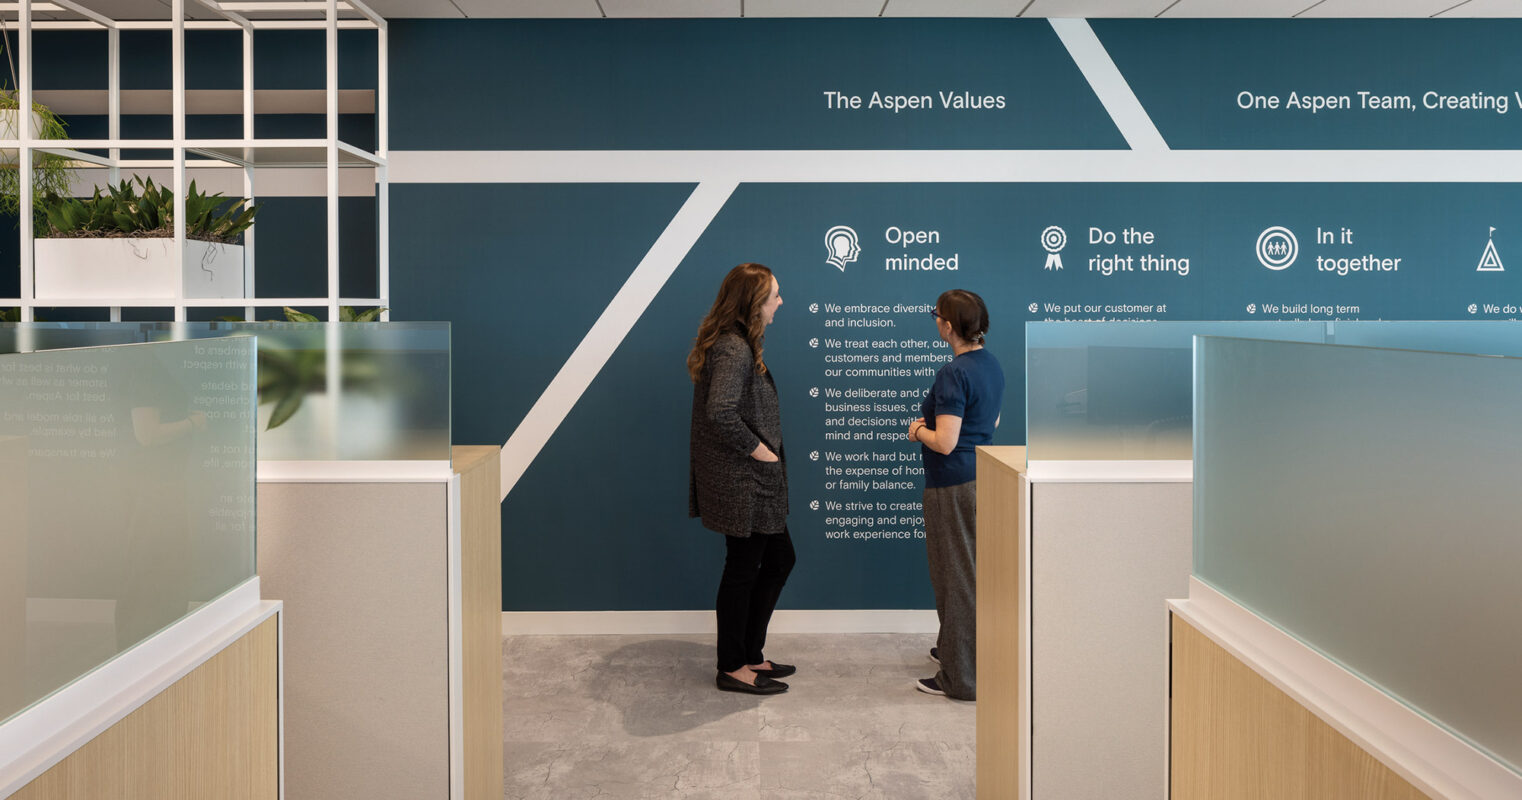 Two individuals in a modern office setting, engaging in conversation beside core value statements displayed on the wall.